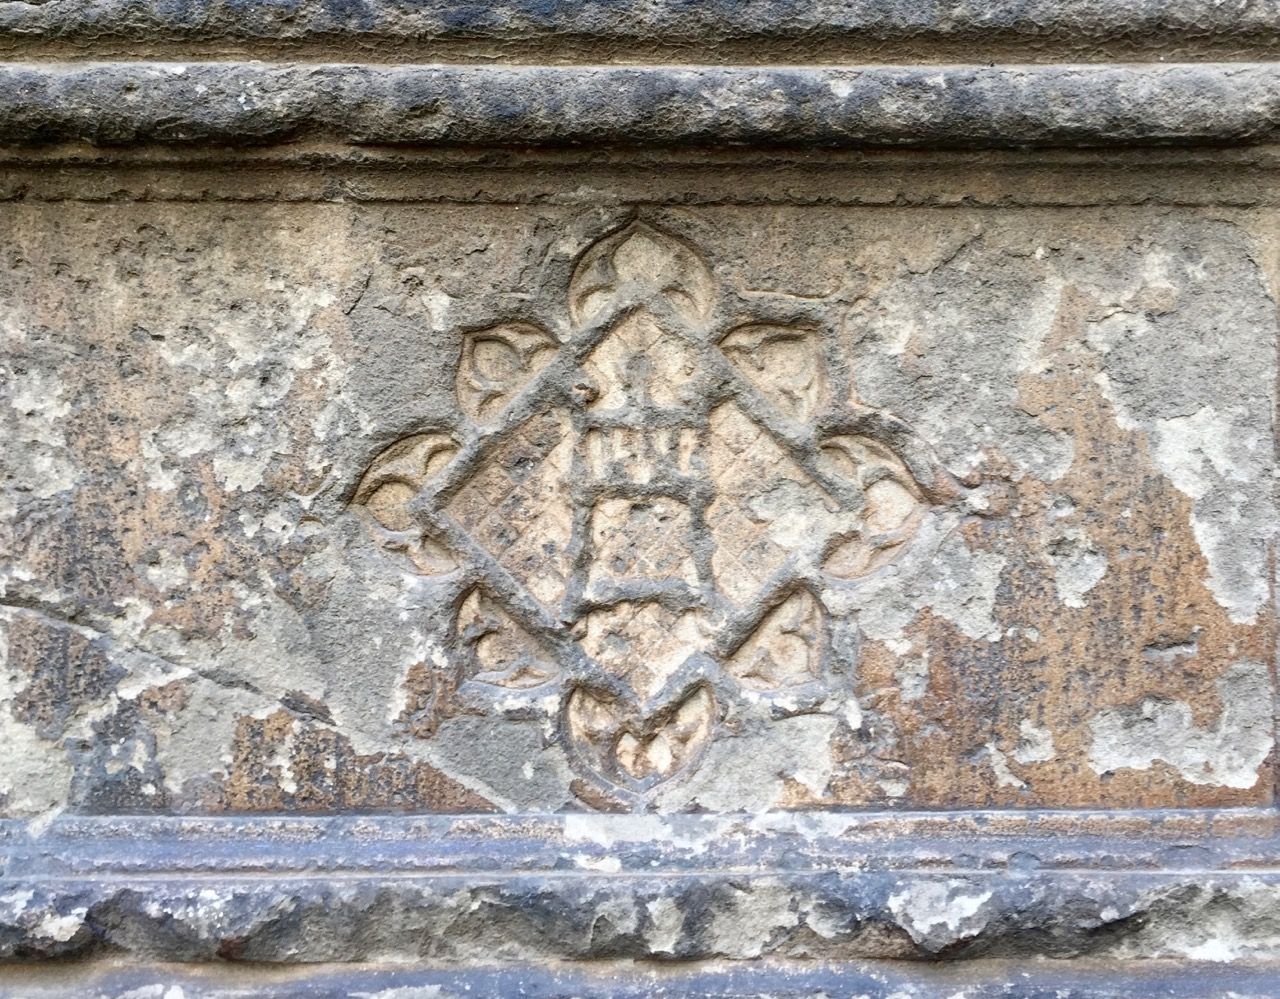 A church seal carved into stone and weathered from time.